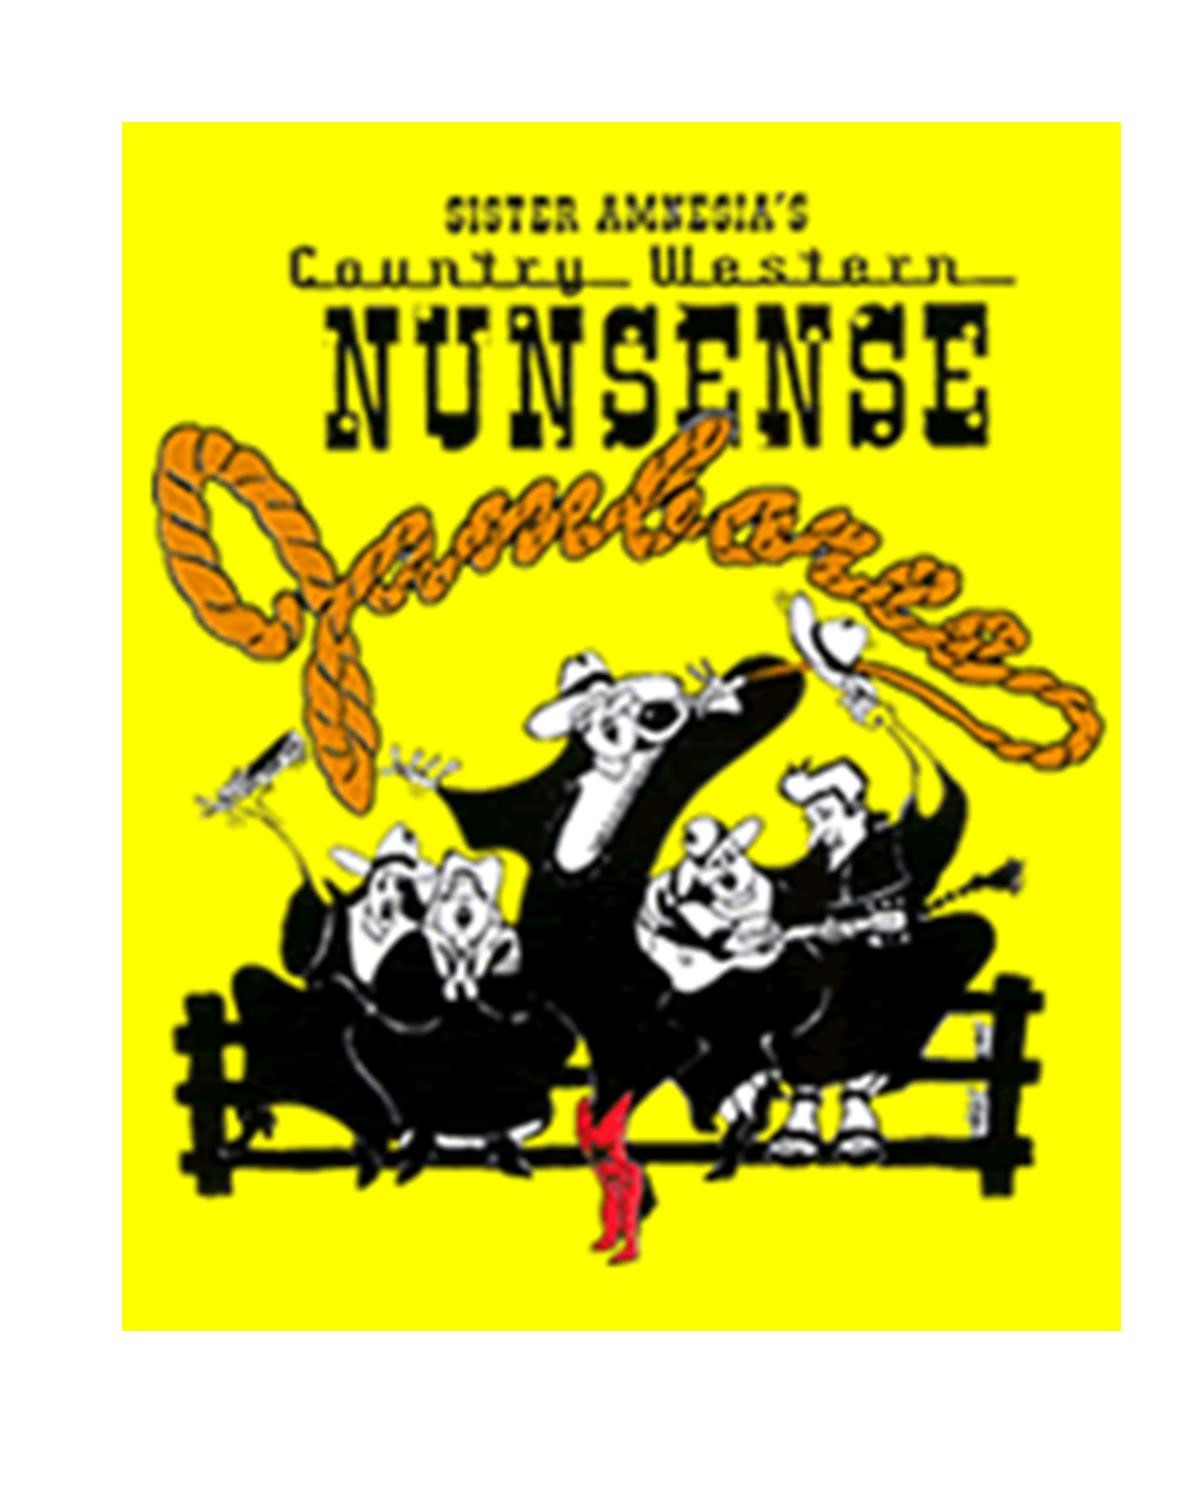 Nunsense Jamboree by Dan Goggin on Oct 18, 00:00@Tater Patch Players Theater - Pick a seat, Buy tickets and Get information on taterpatchplayers.org taterpatchplayers